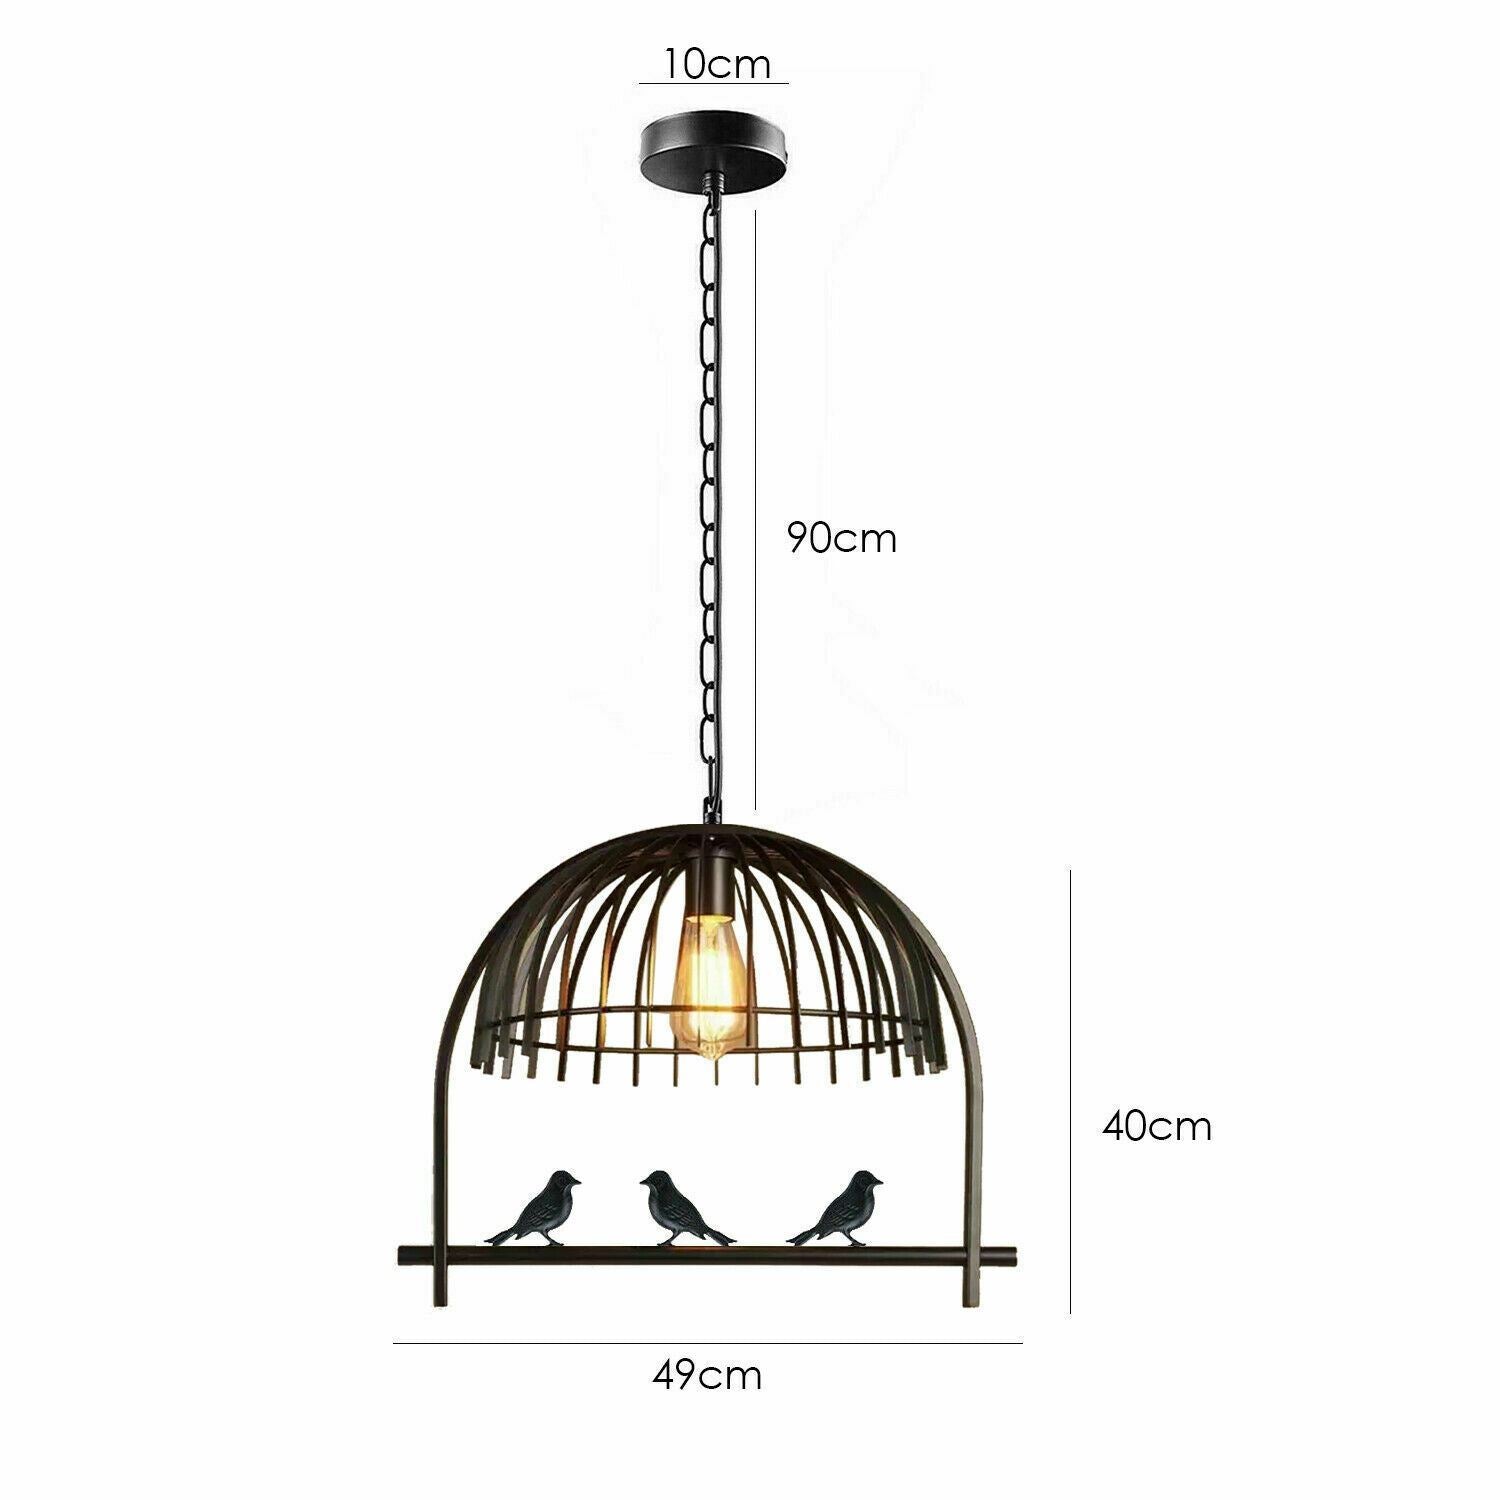 Industrial Retro Bird cage Light Shade Hanging Ceiling Light with Chain - Size